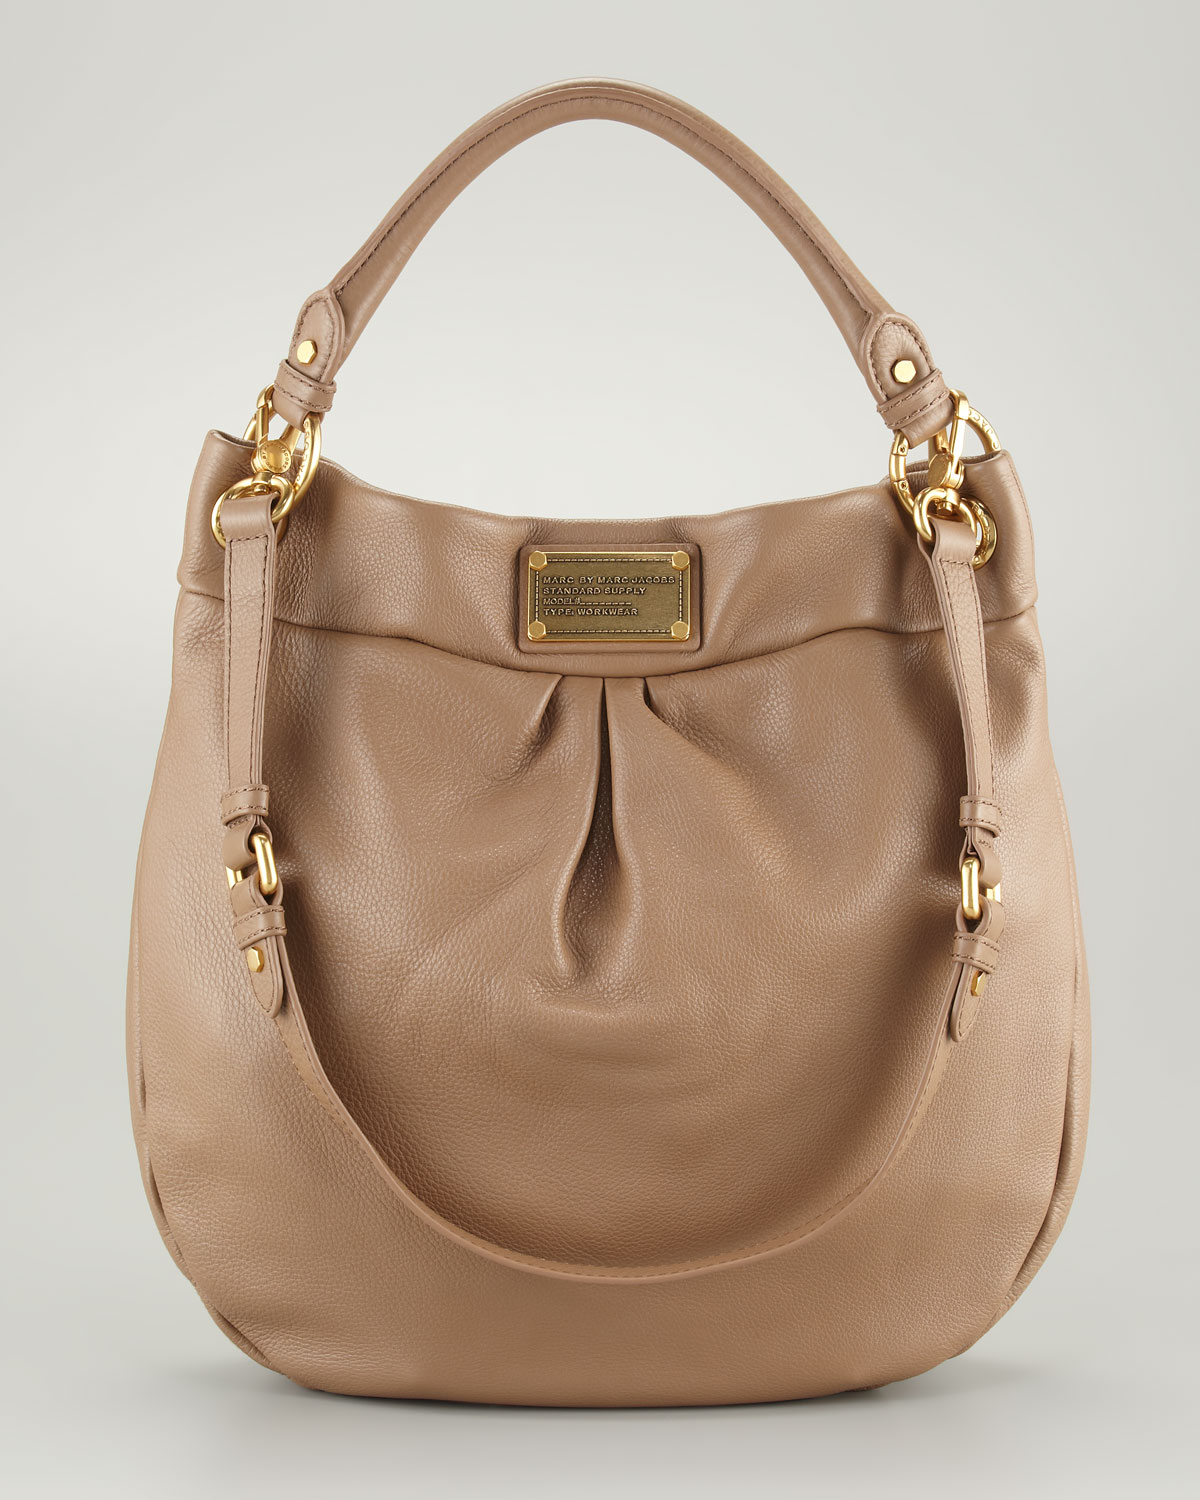 Marc by marc jacobs Classic Q Hillier Hobo Bag Praline in Beige (praline) | Lyst